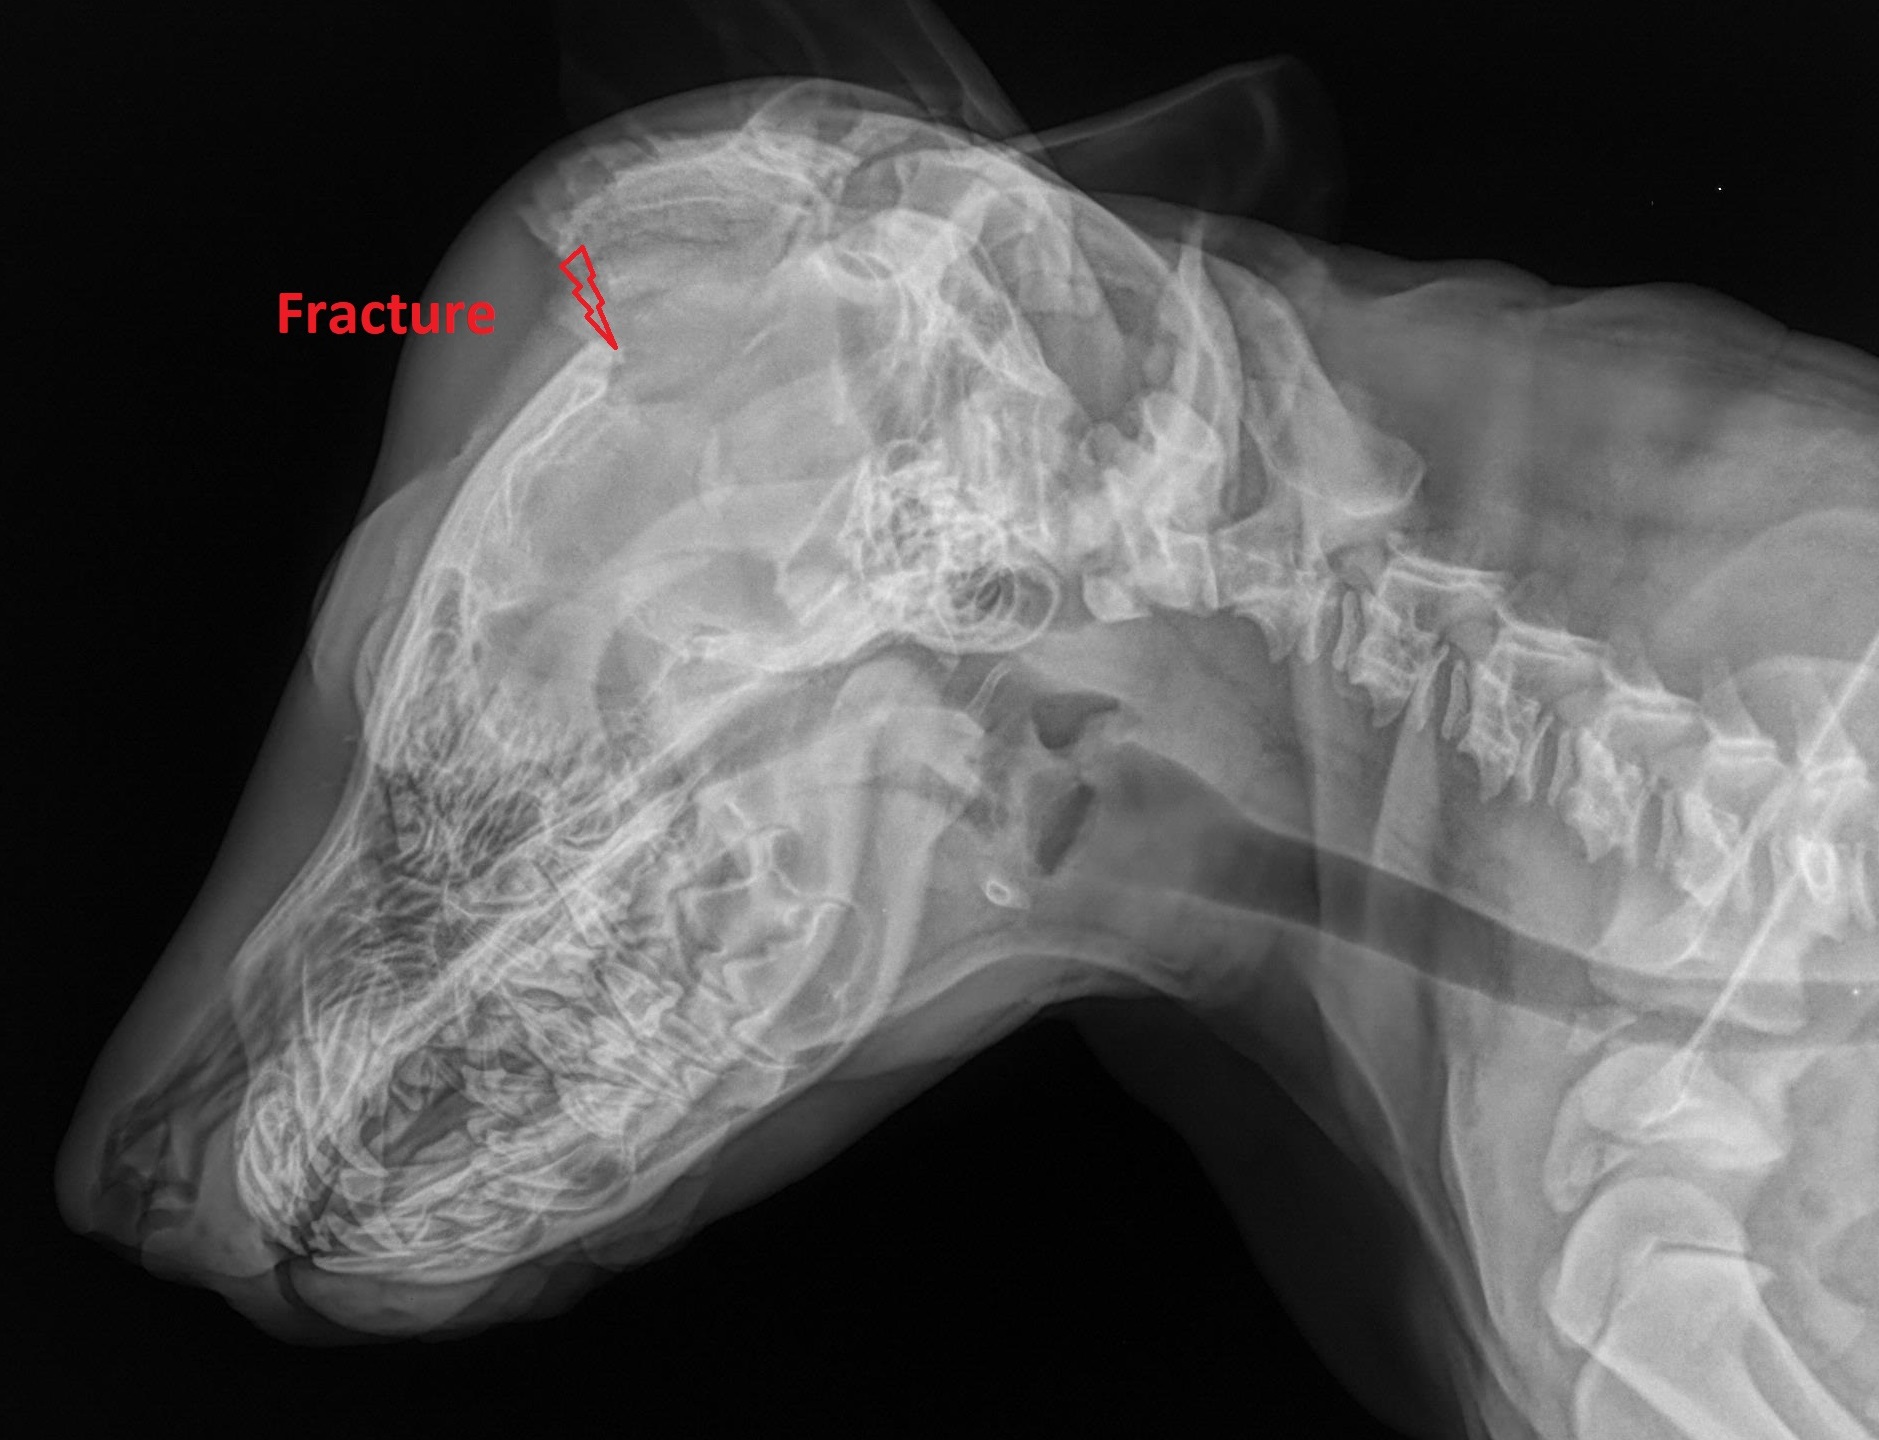 A fracture in the skull